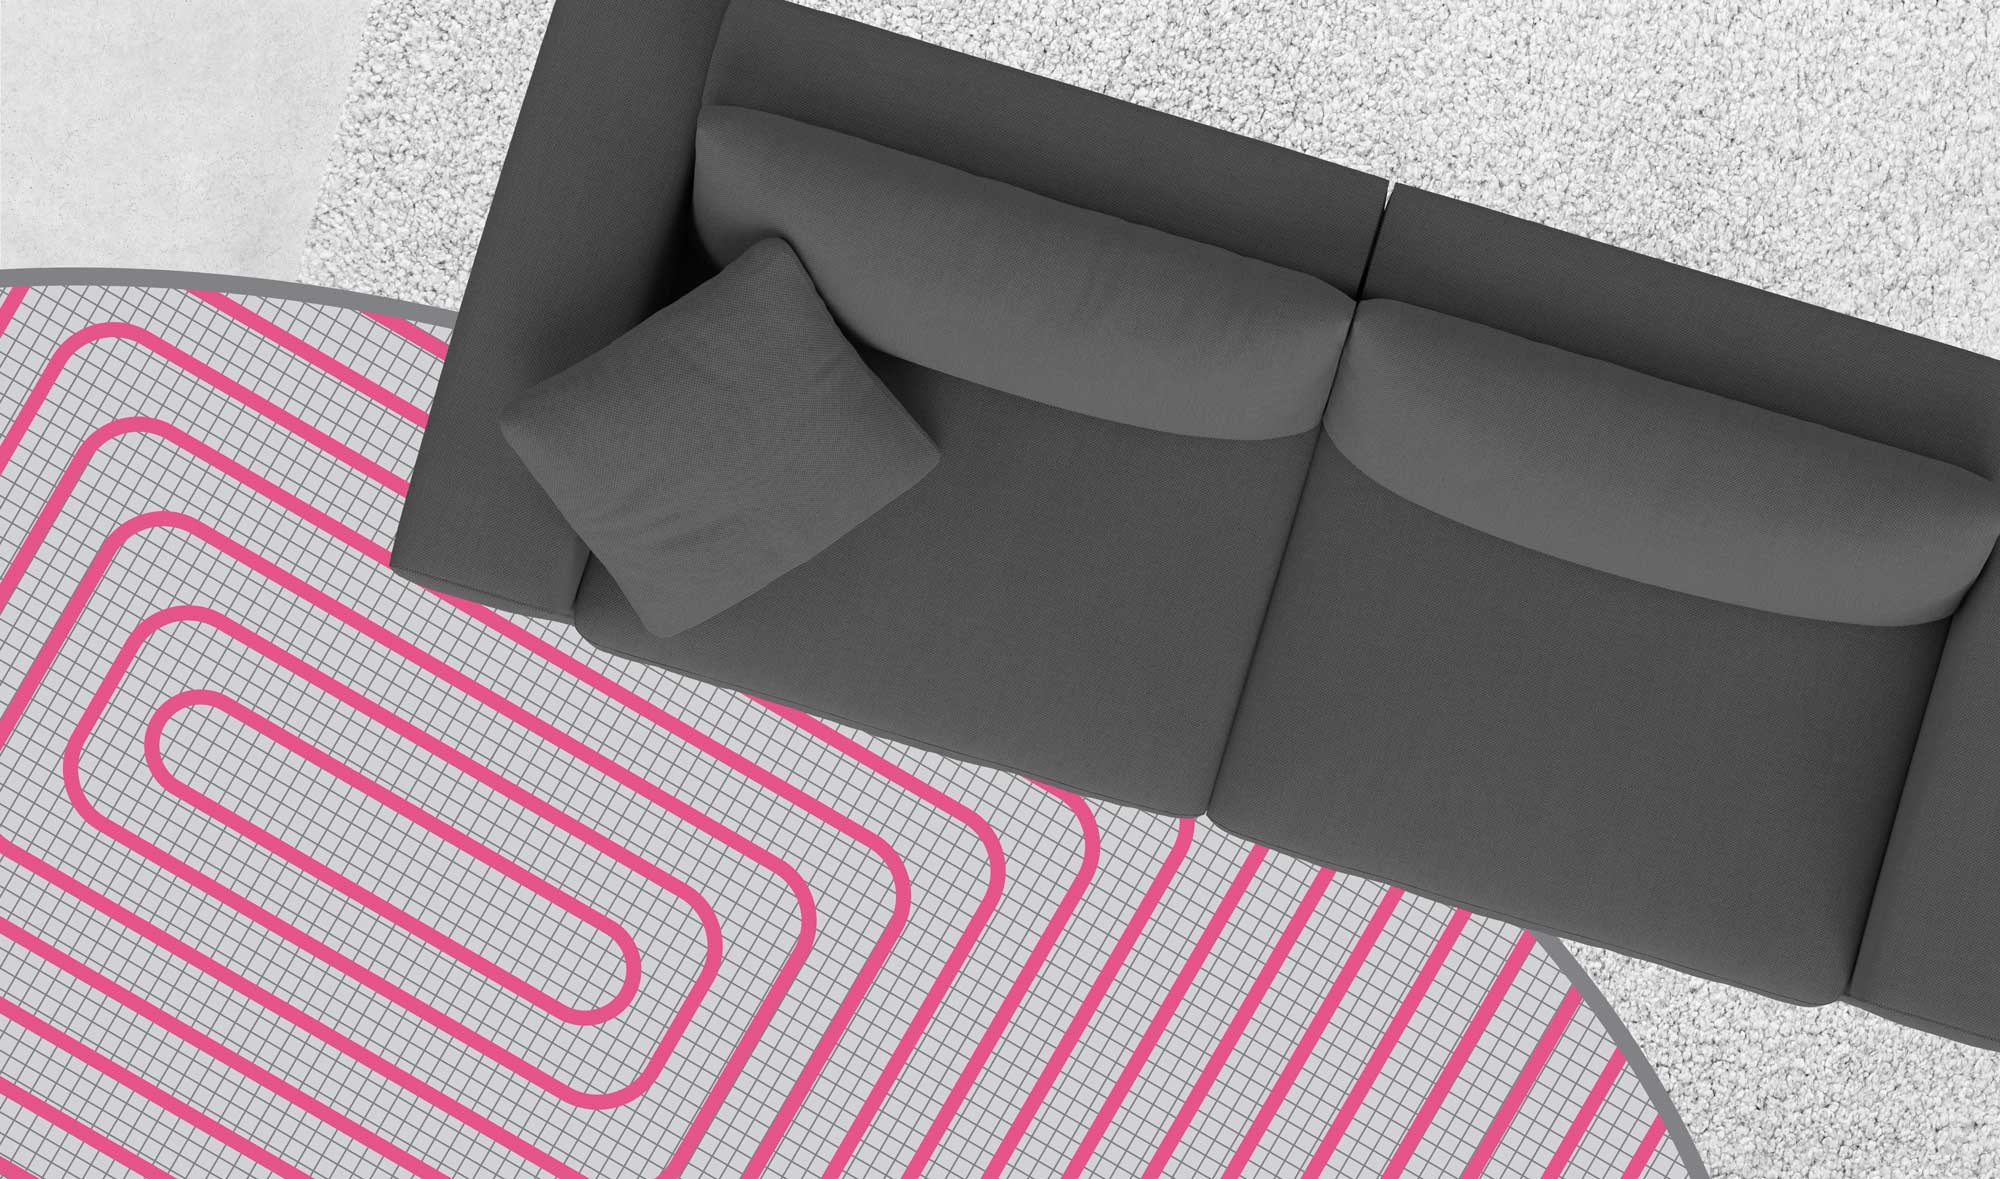 Image compilation of dark lounge suite, light grey carpet and pink hydronic heating coils